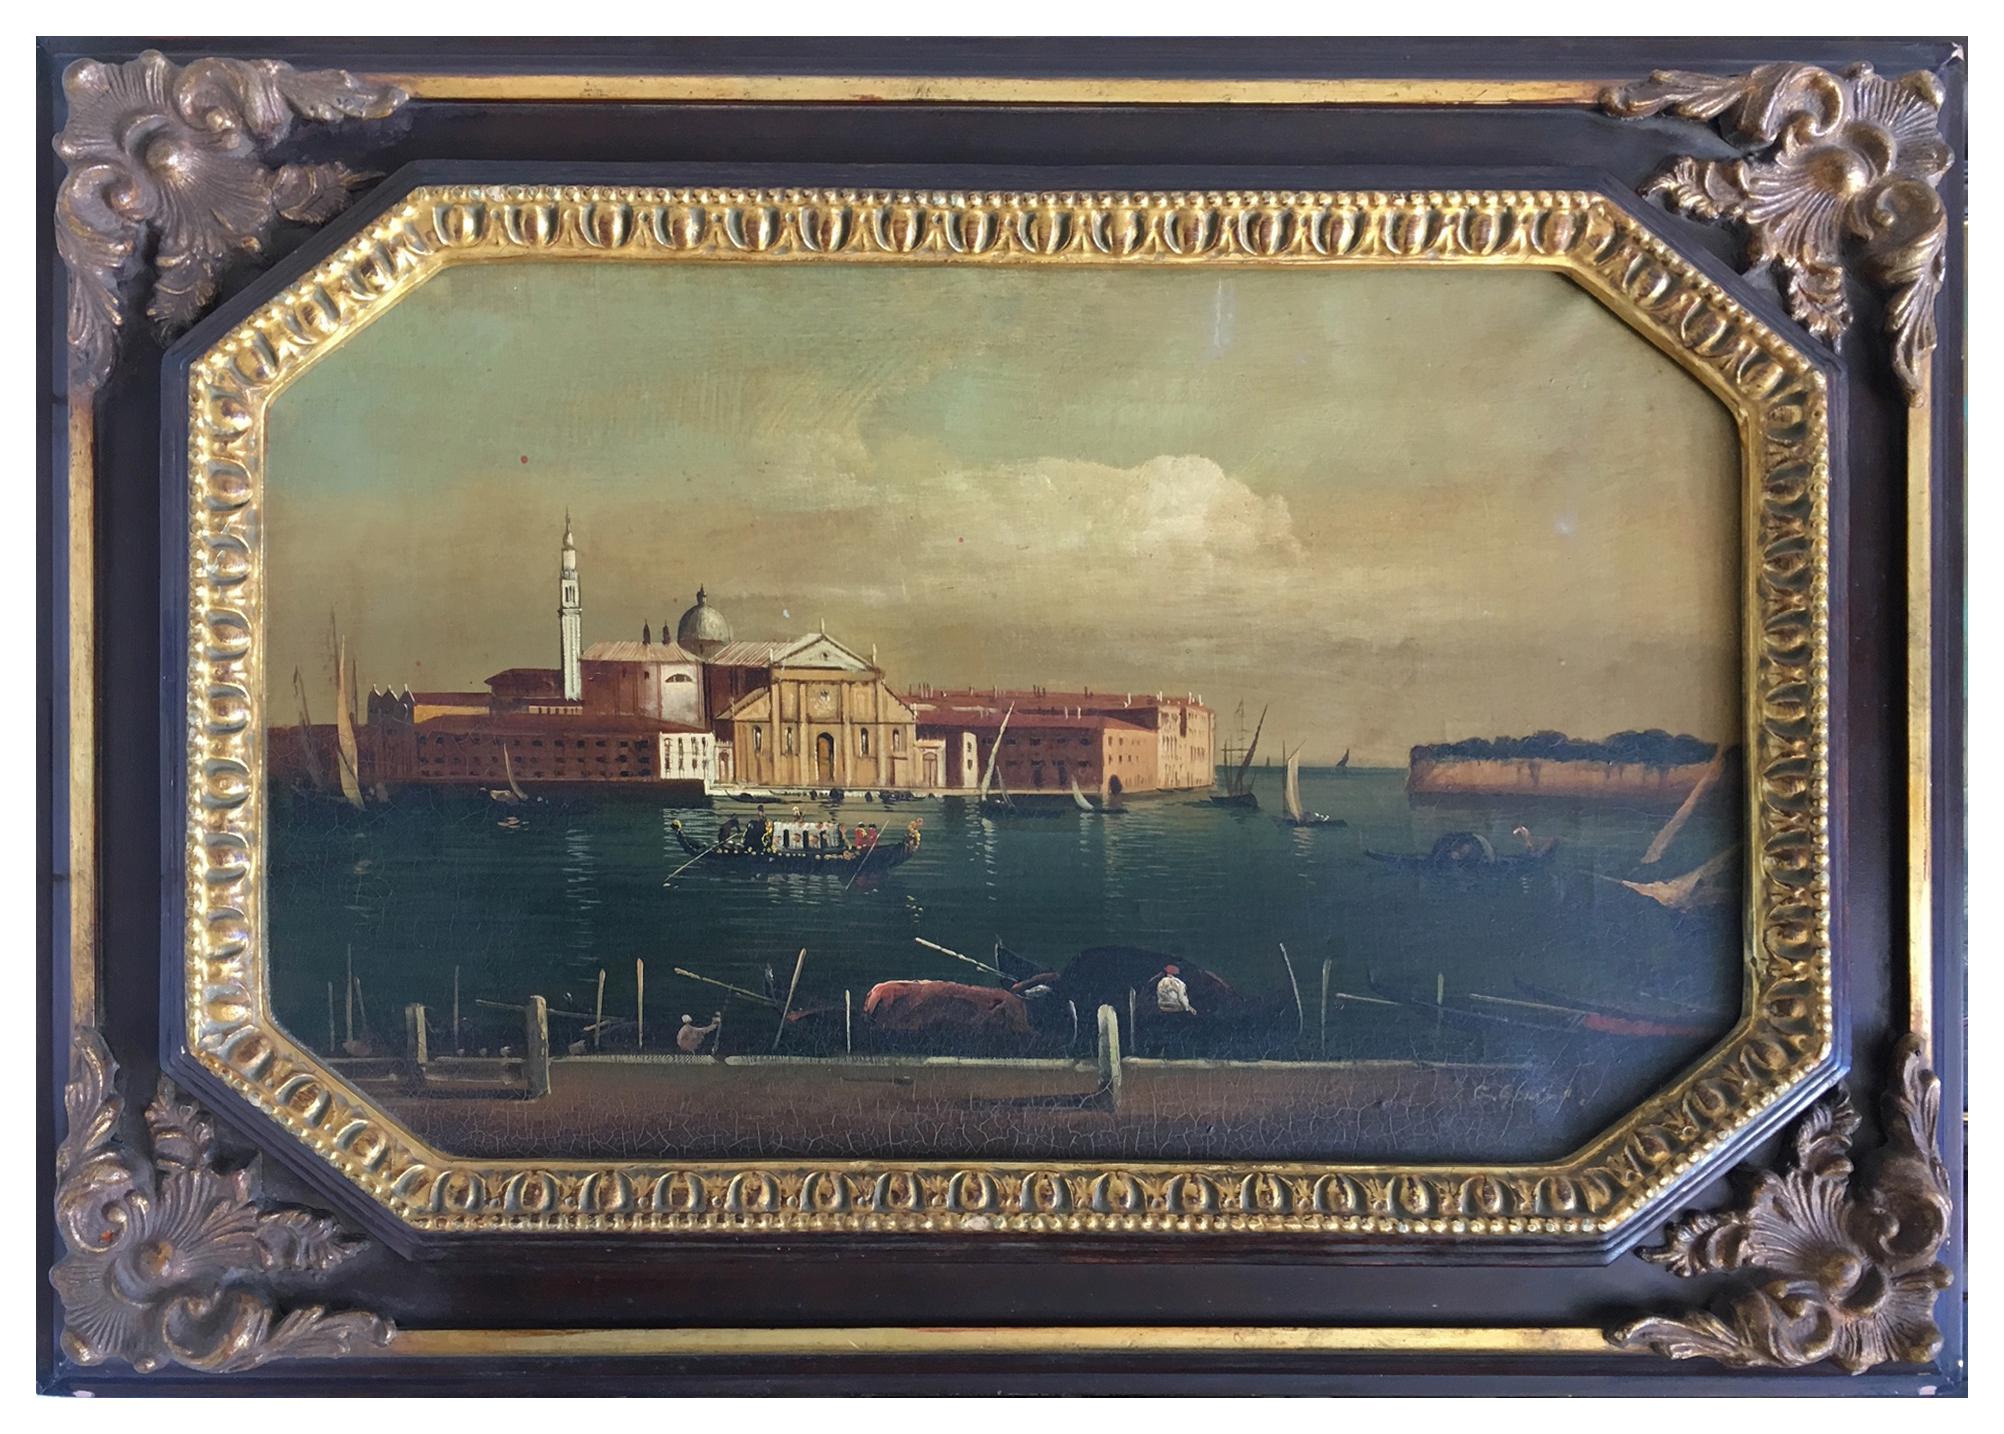 Giancarlo Gorini Landscape Painting - VENICE - In the Manner of Canaletto - Italian Landscape Oil on Canvas Painting